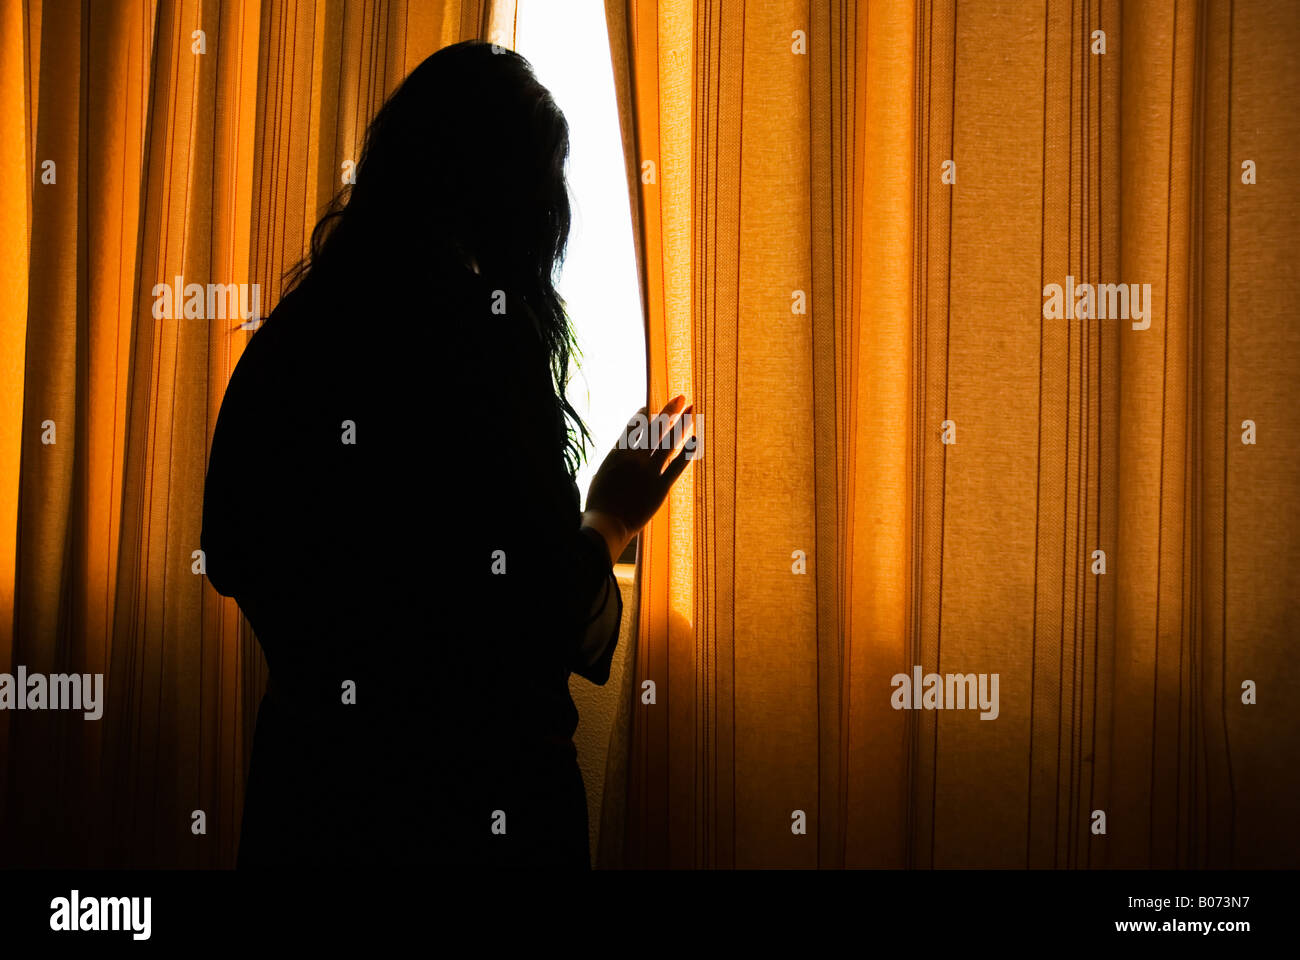 Mystery woman is looking through a gap in the curtains.She may be suffering from an illness such as depresion or agoraphobia. Stock Photo